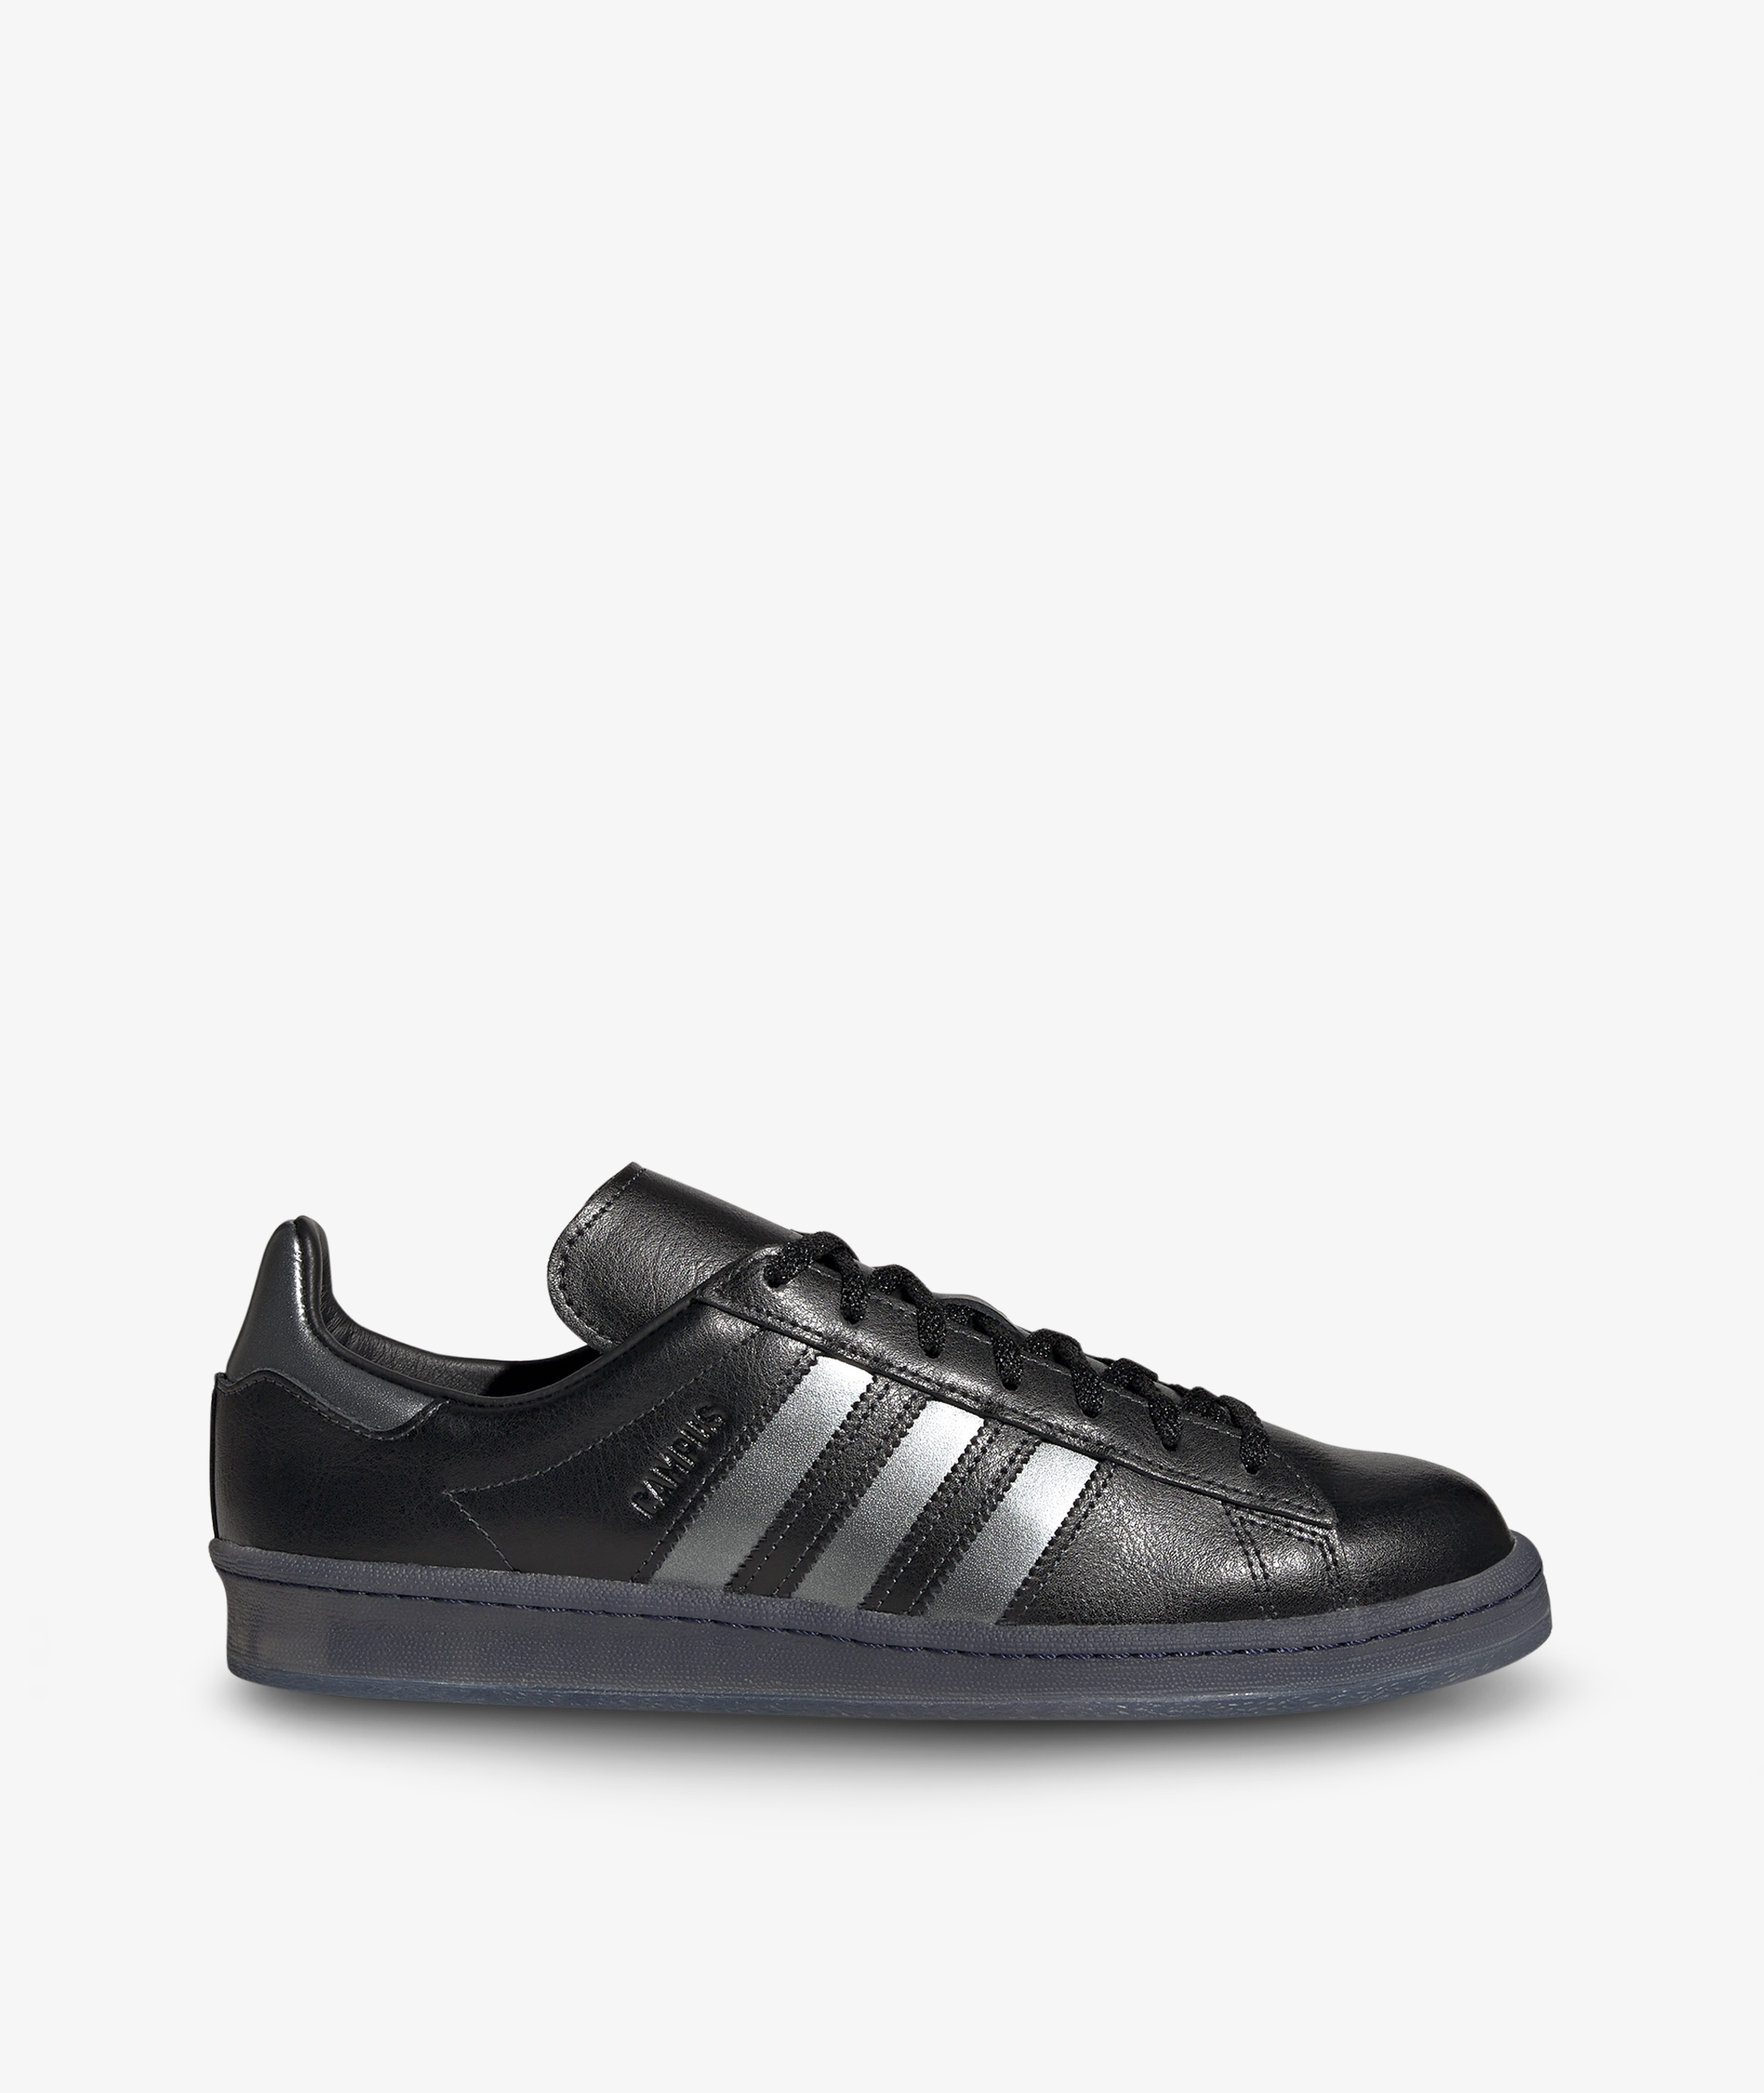 Norse Store | Shipping Worldwide - adidas Originals CAMPUS 80s